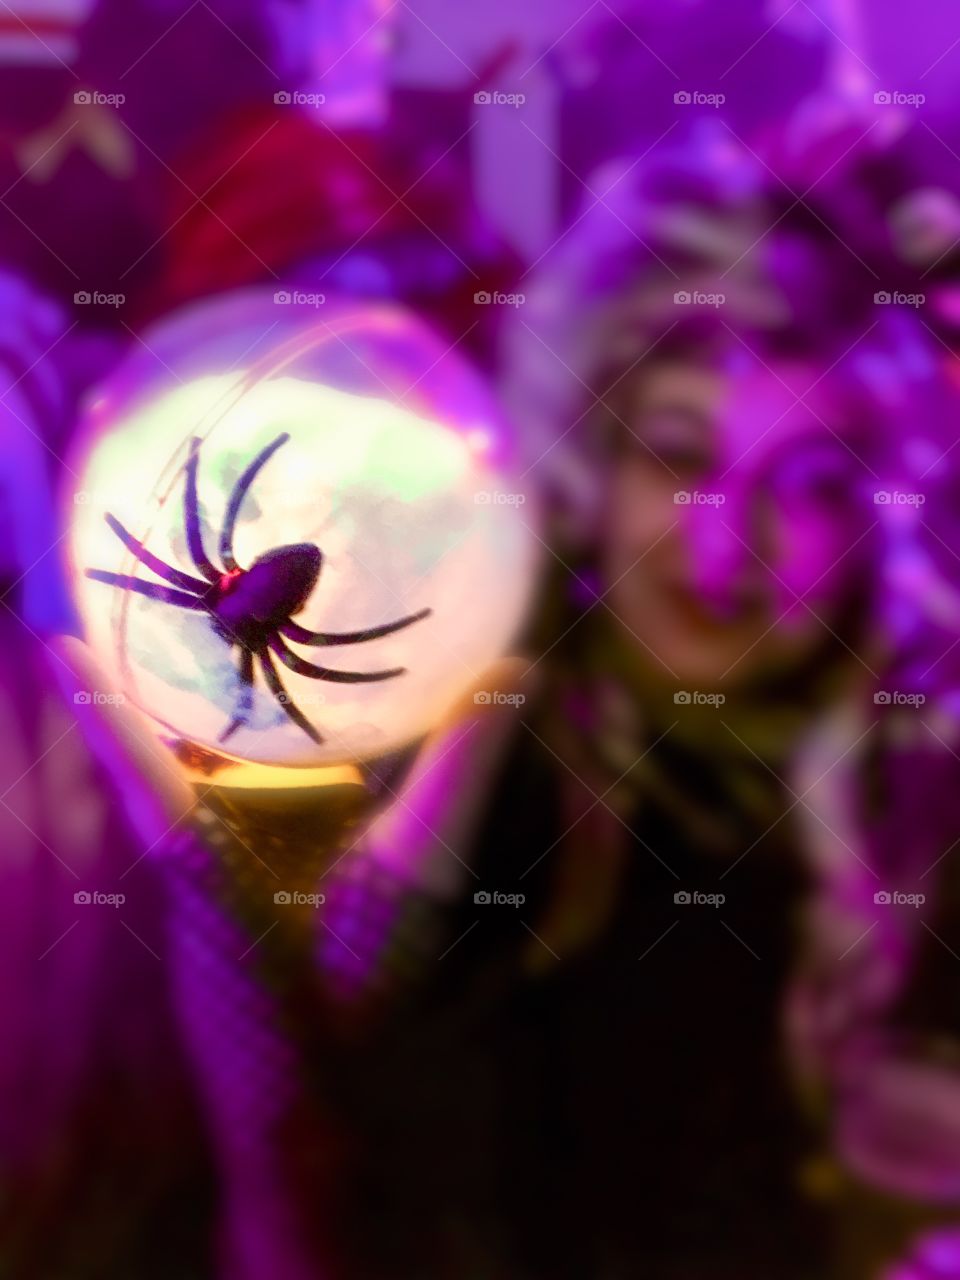 Random woman holding a sphere with a spider in it